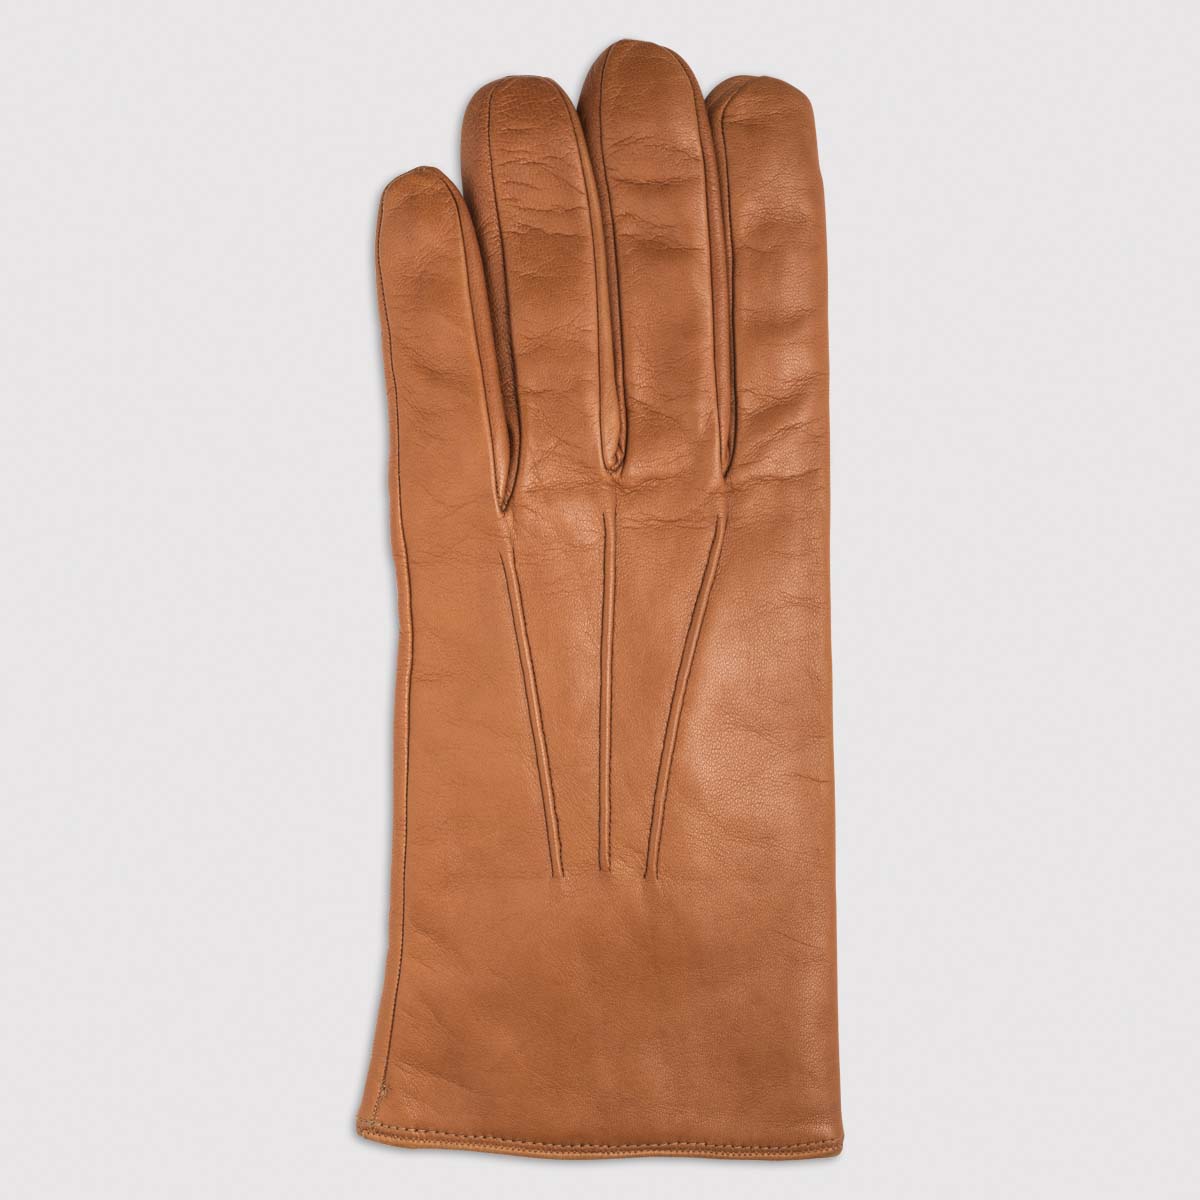 Nappa Leather Glove with Wool Lining and Button Detail in Camel – 8.5